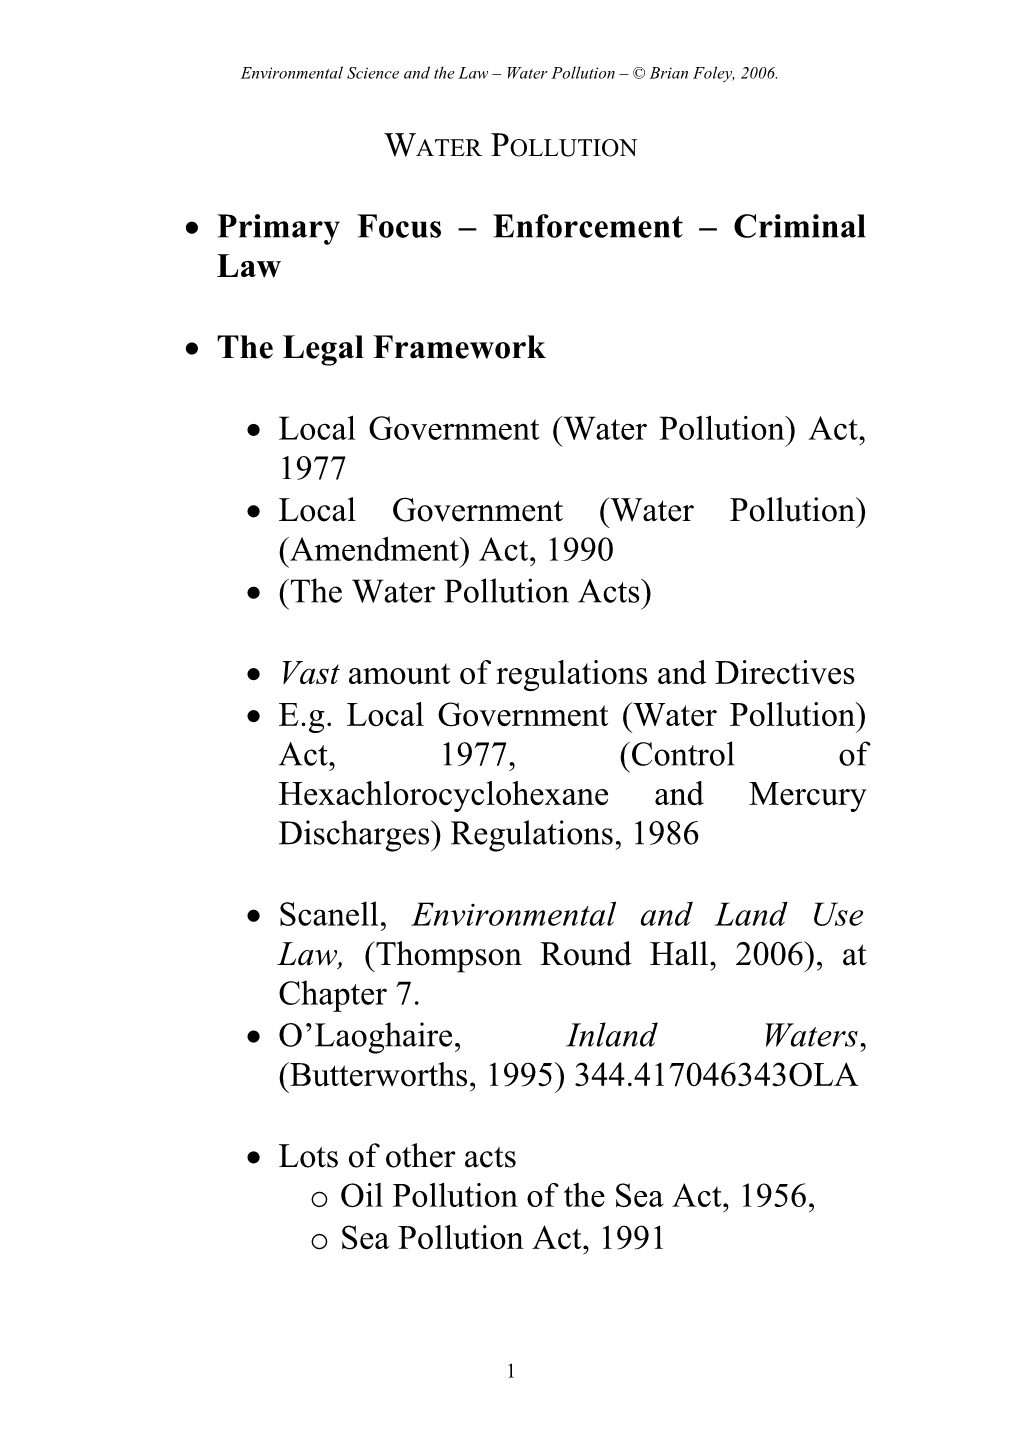 Environmental Science and the Law Water Pollution Brian Foley, 2006